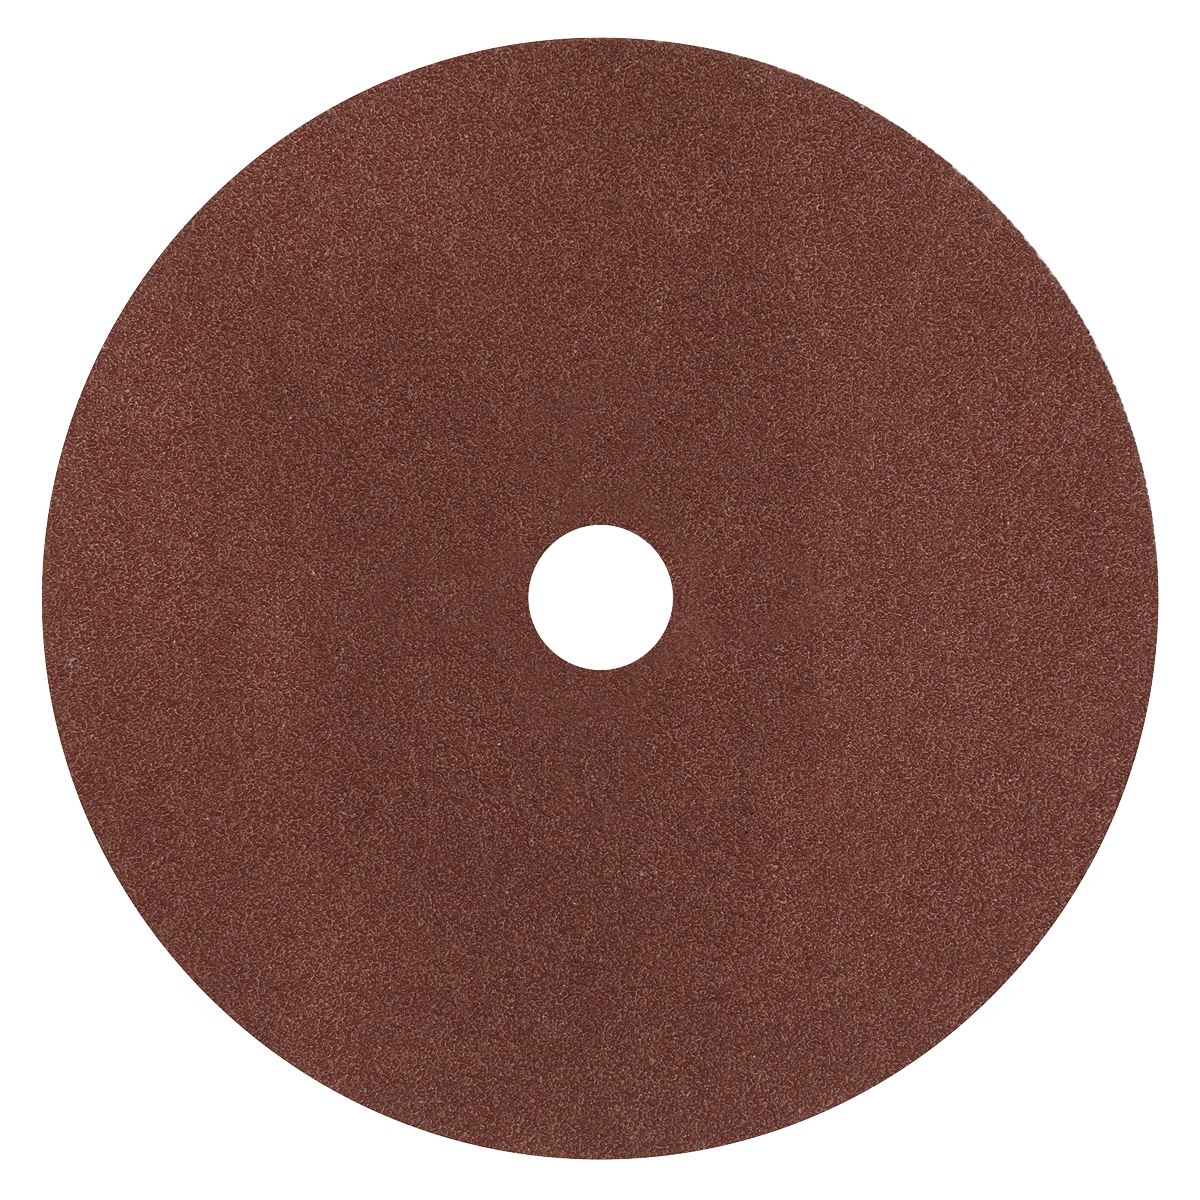 Worksafe by Sealey Ø175mm Fibre Backed Disc 60Grit - Pack of 25